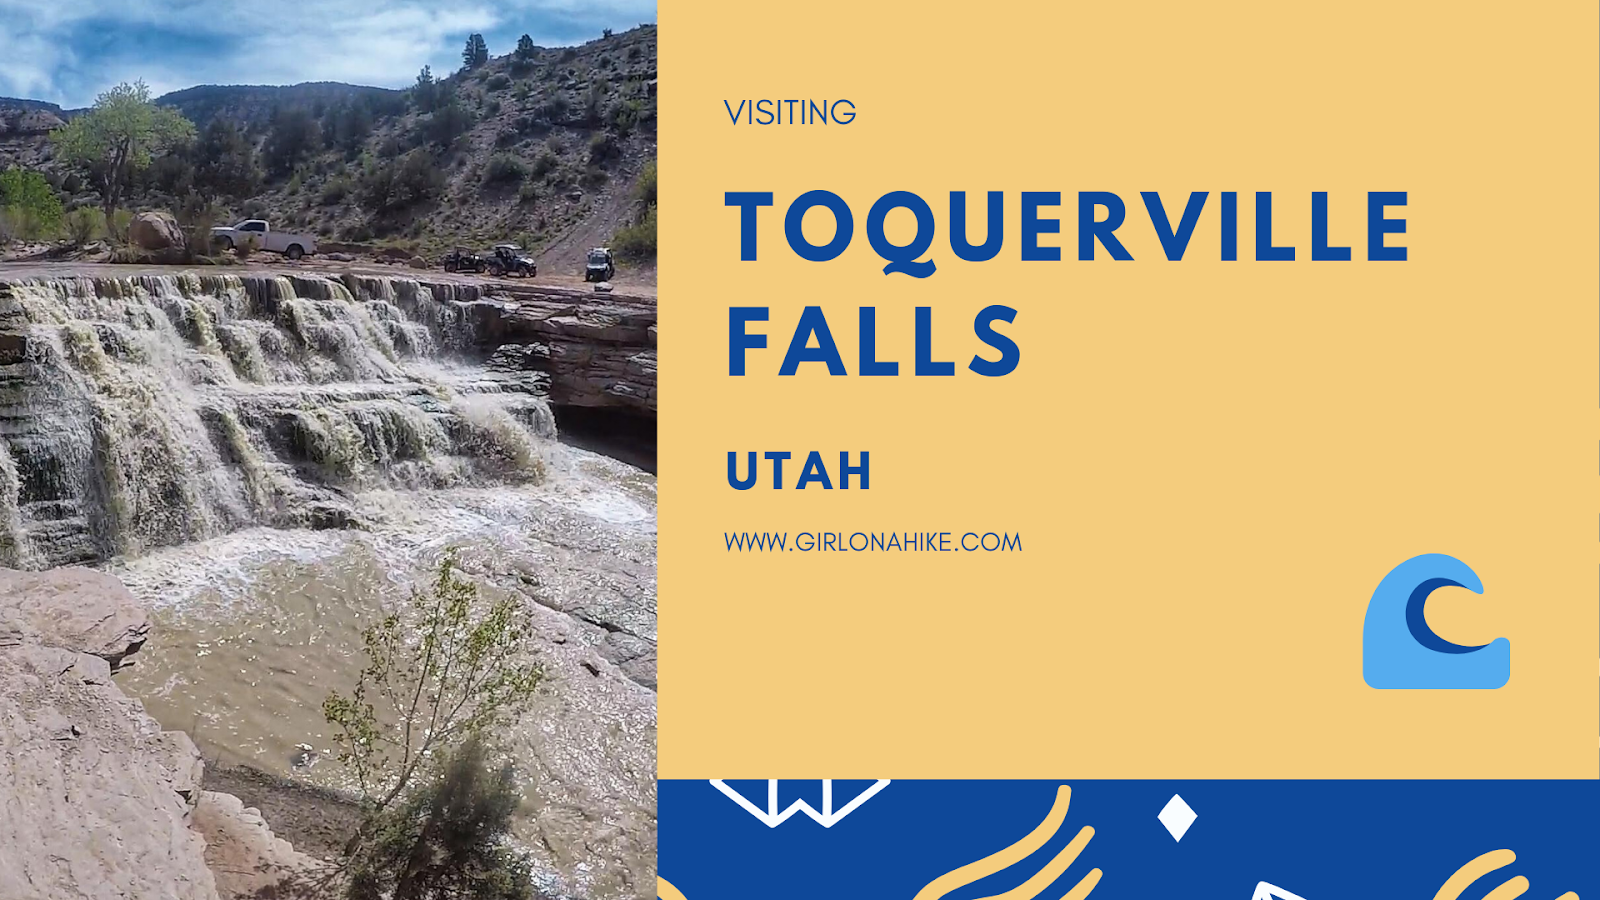 Visiting Toquerville Falls, The Best Dog Friendly Waterfalls Hikes in Utah